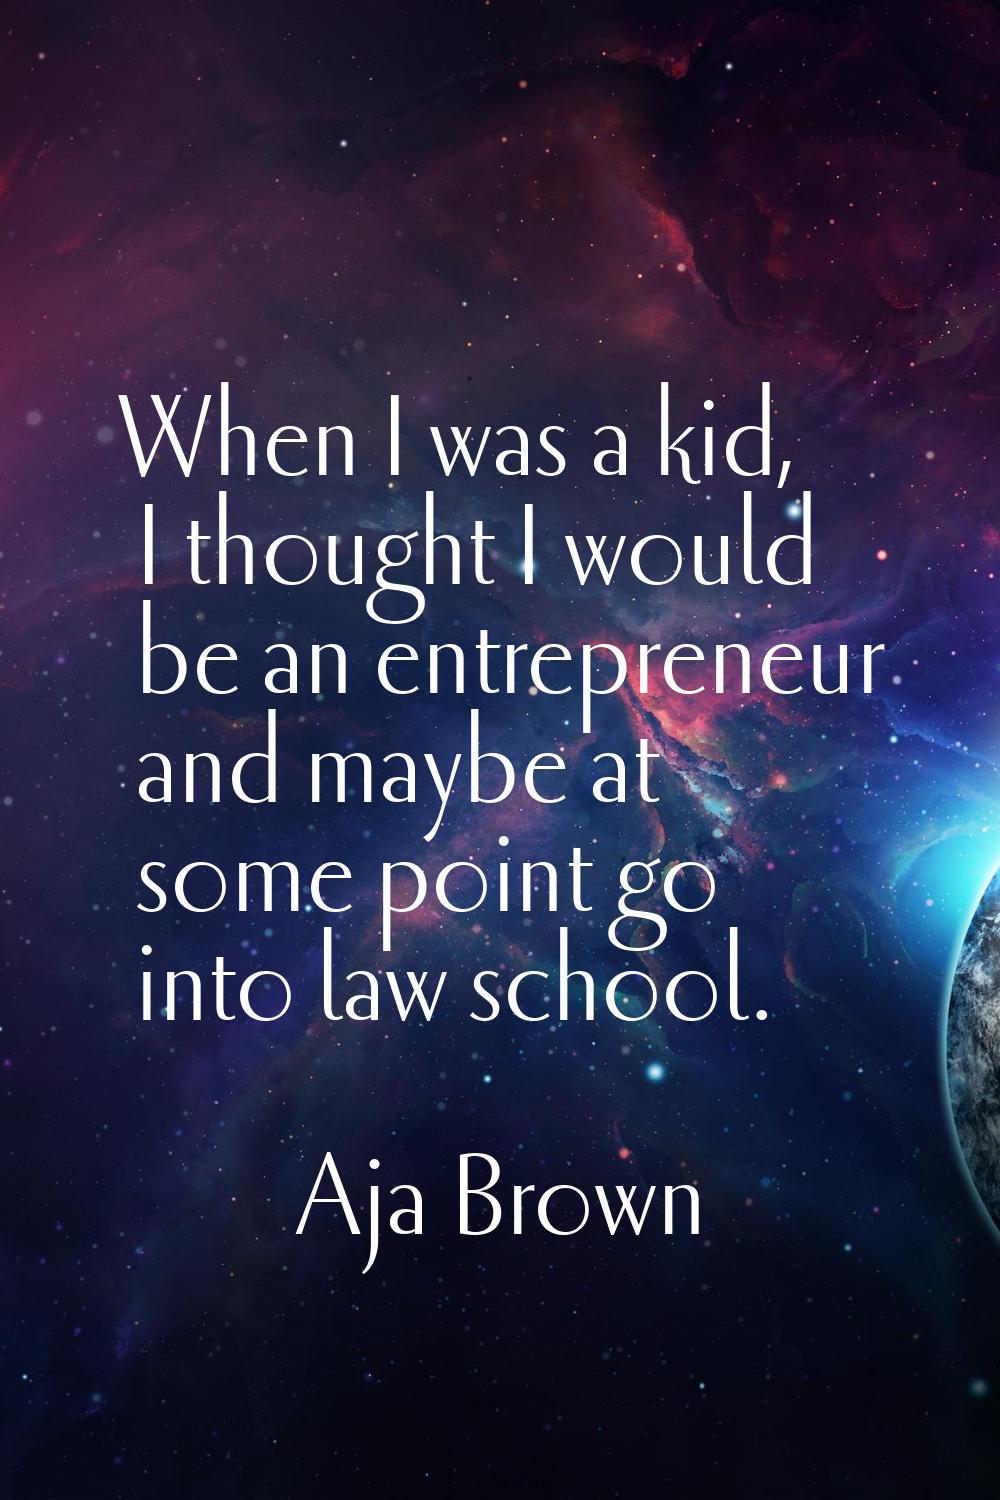 When I was a kid, I thought I would be an entrepreneur and maybe at some point go into law school.